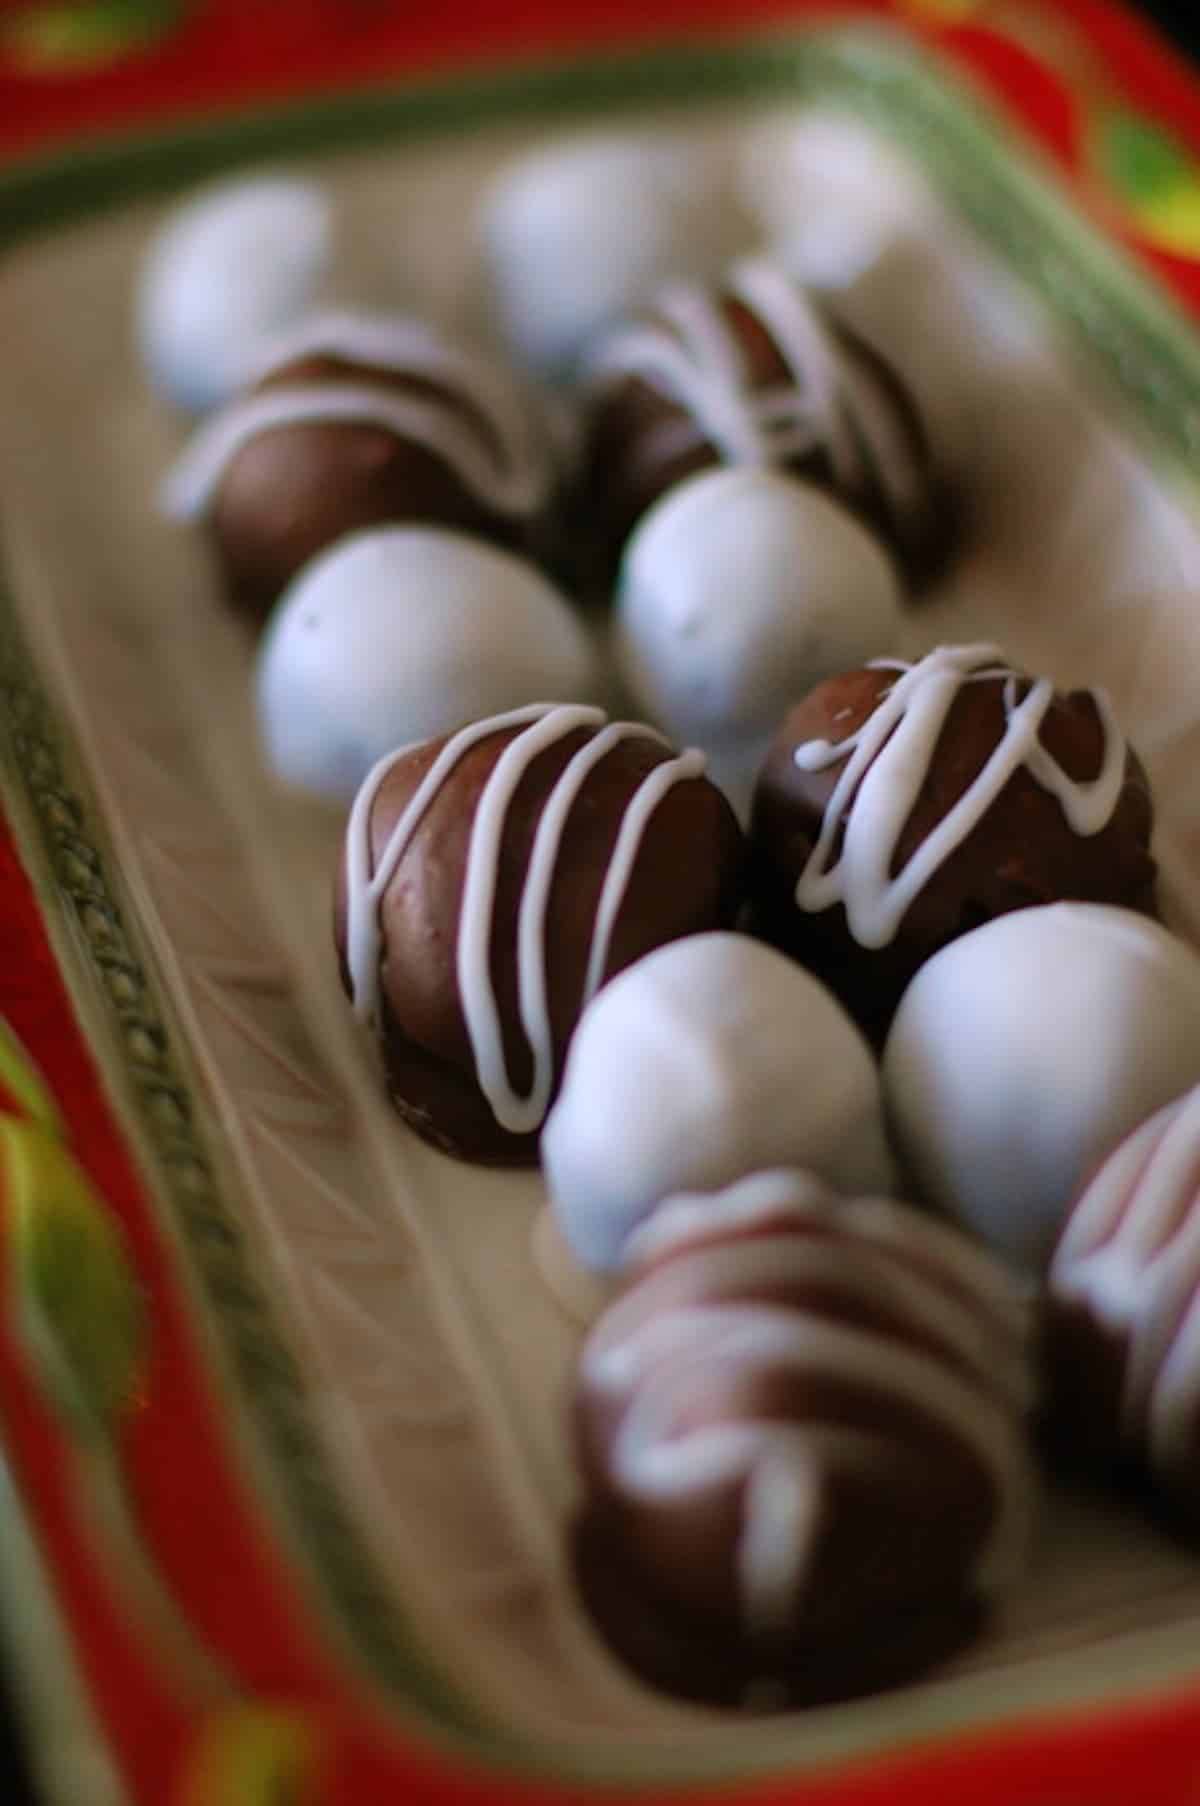 Minty Chocolate Oreo Truffles in a red and green tin pan.